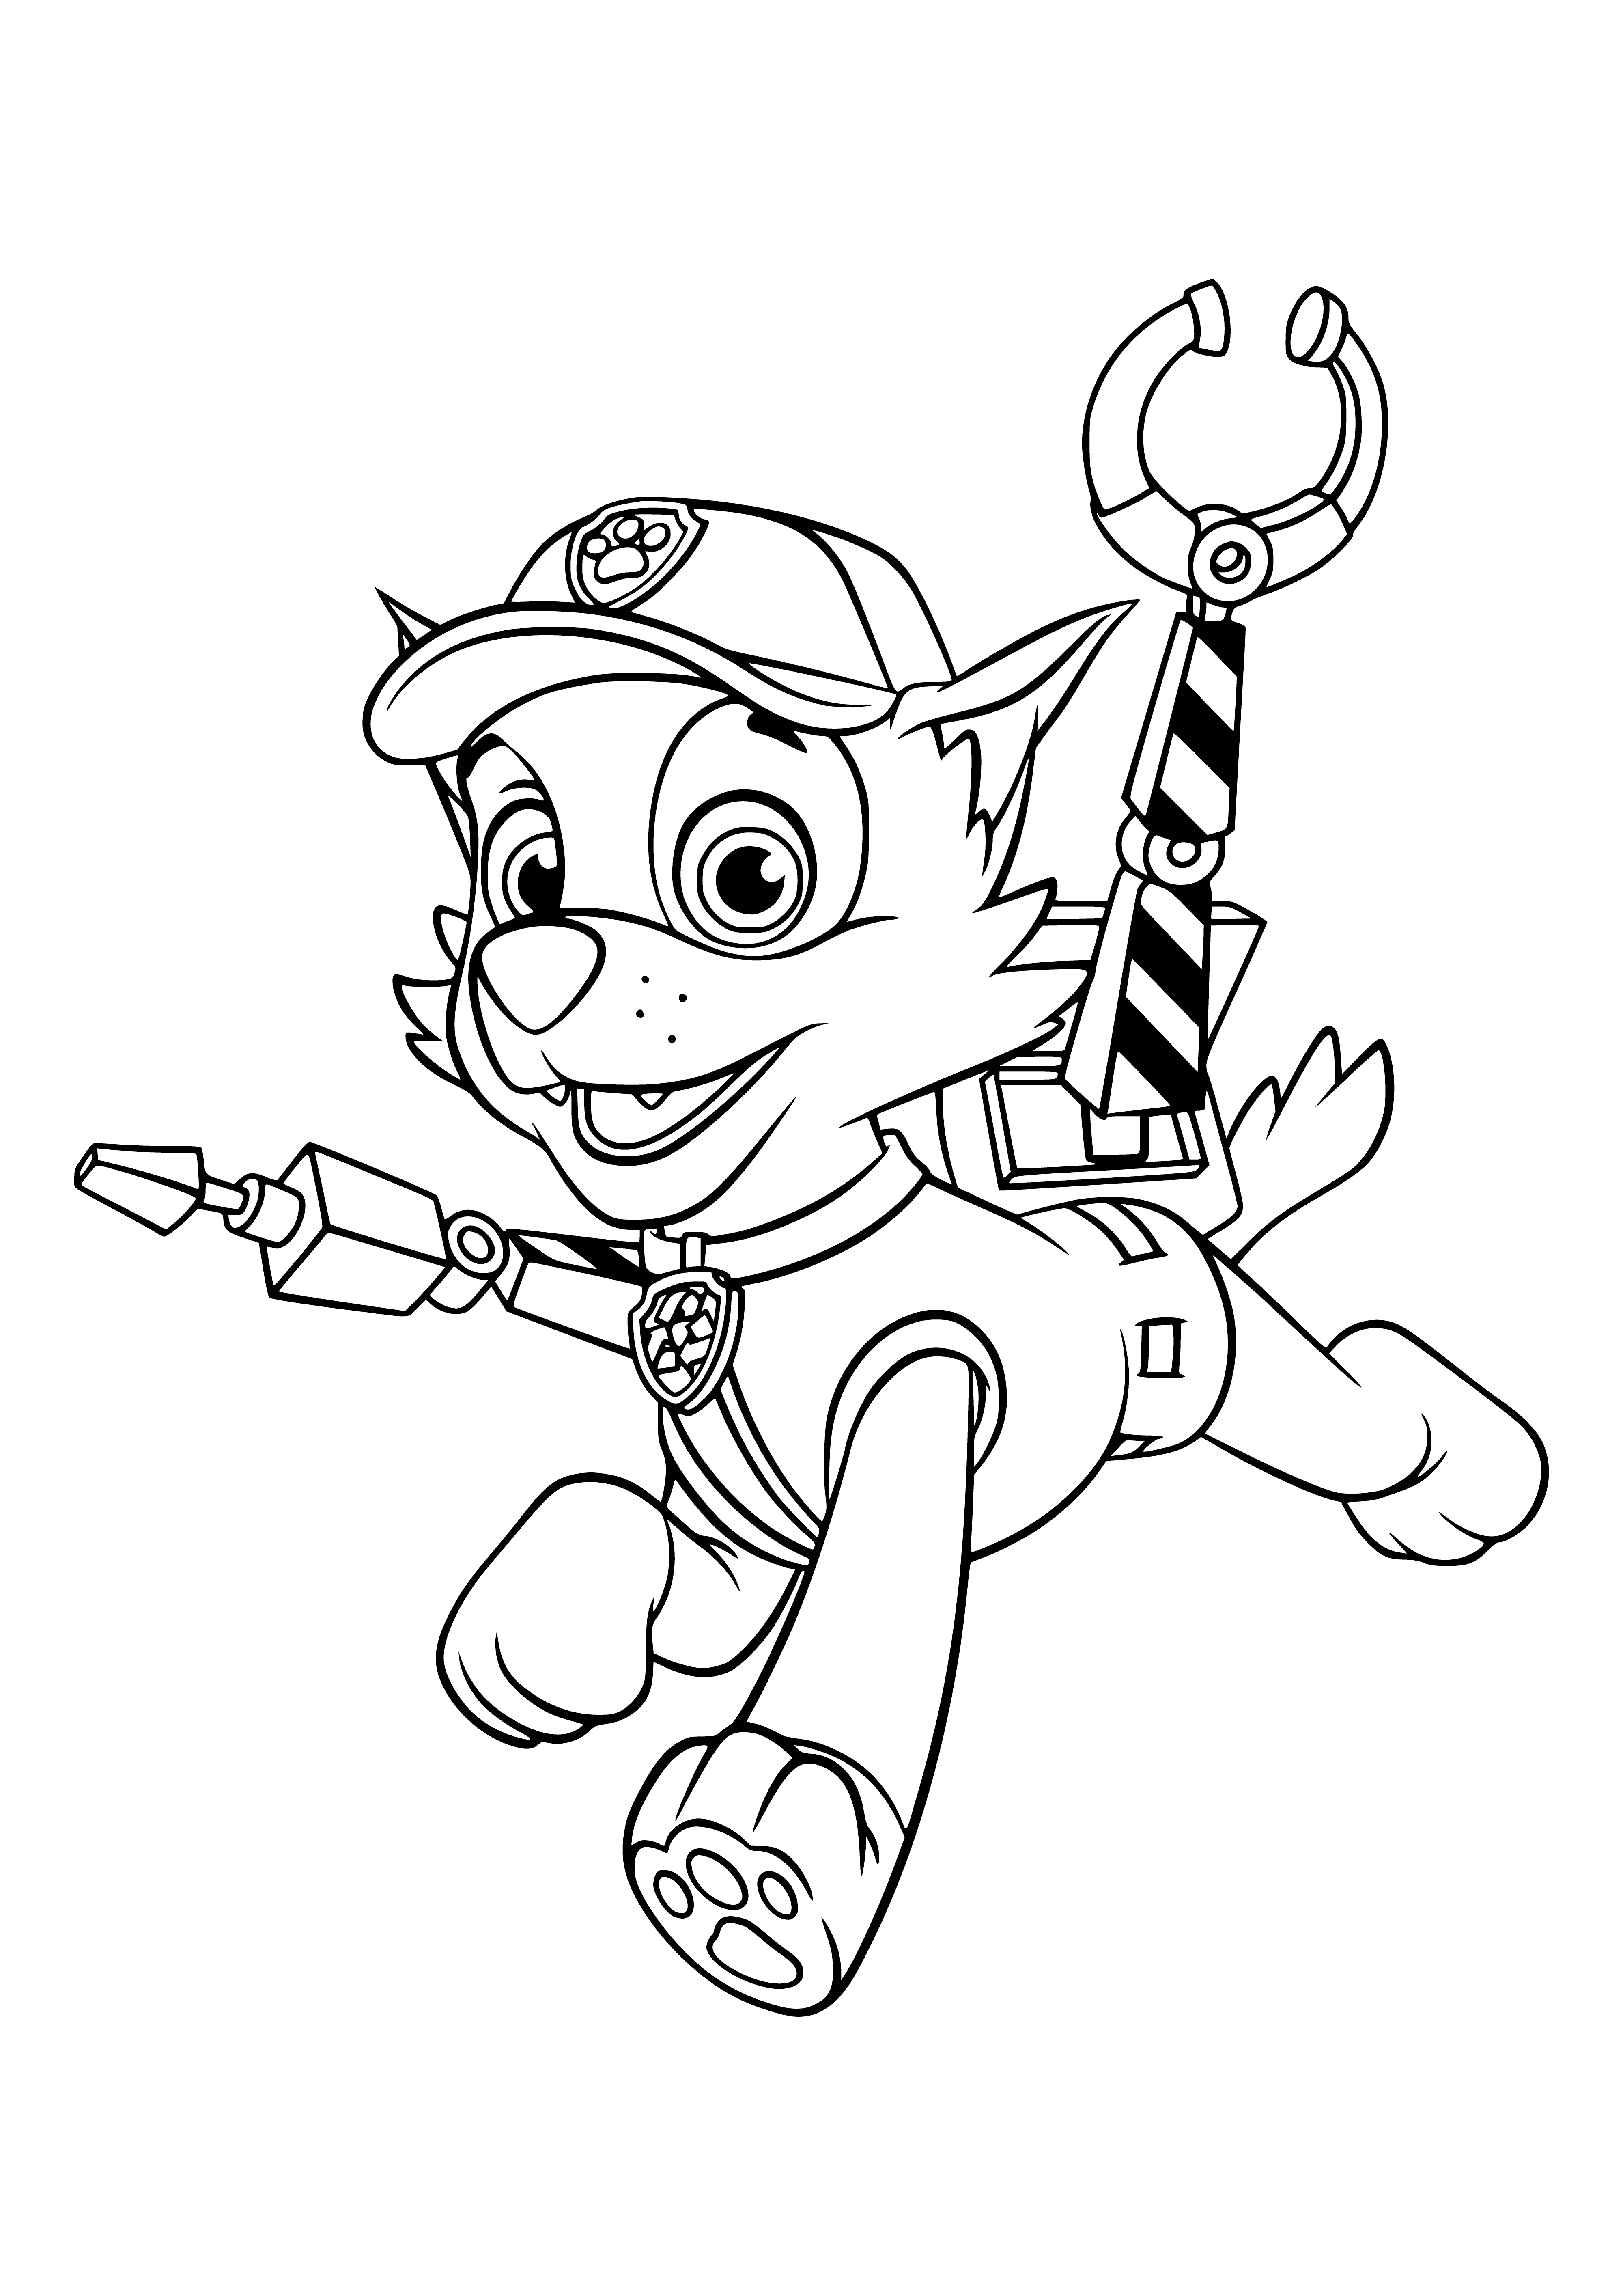 coloring page: Rocky is a brown dog with light brown spots, a black nose, and big black eyes; wearing a fire helmet, holding a fire hose, in front of a red fire truck.